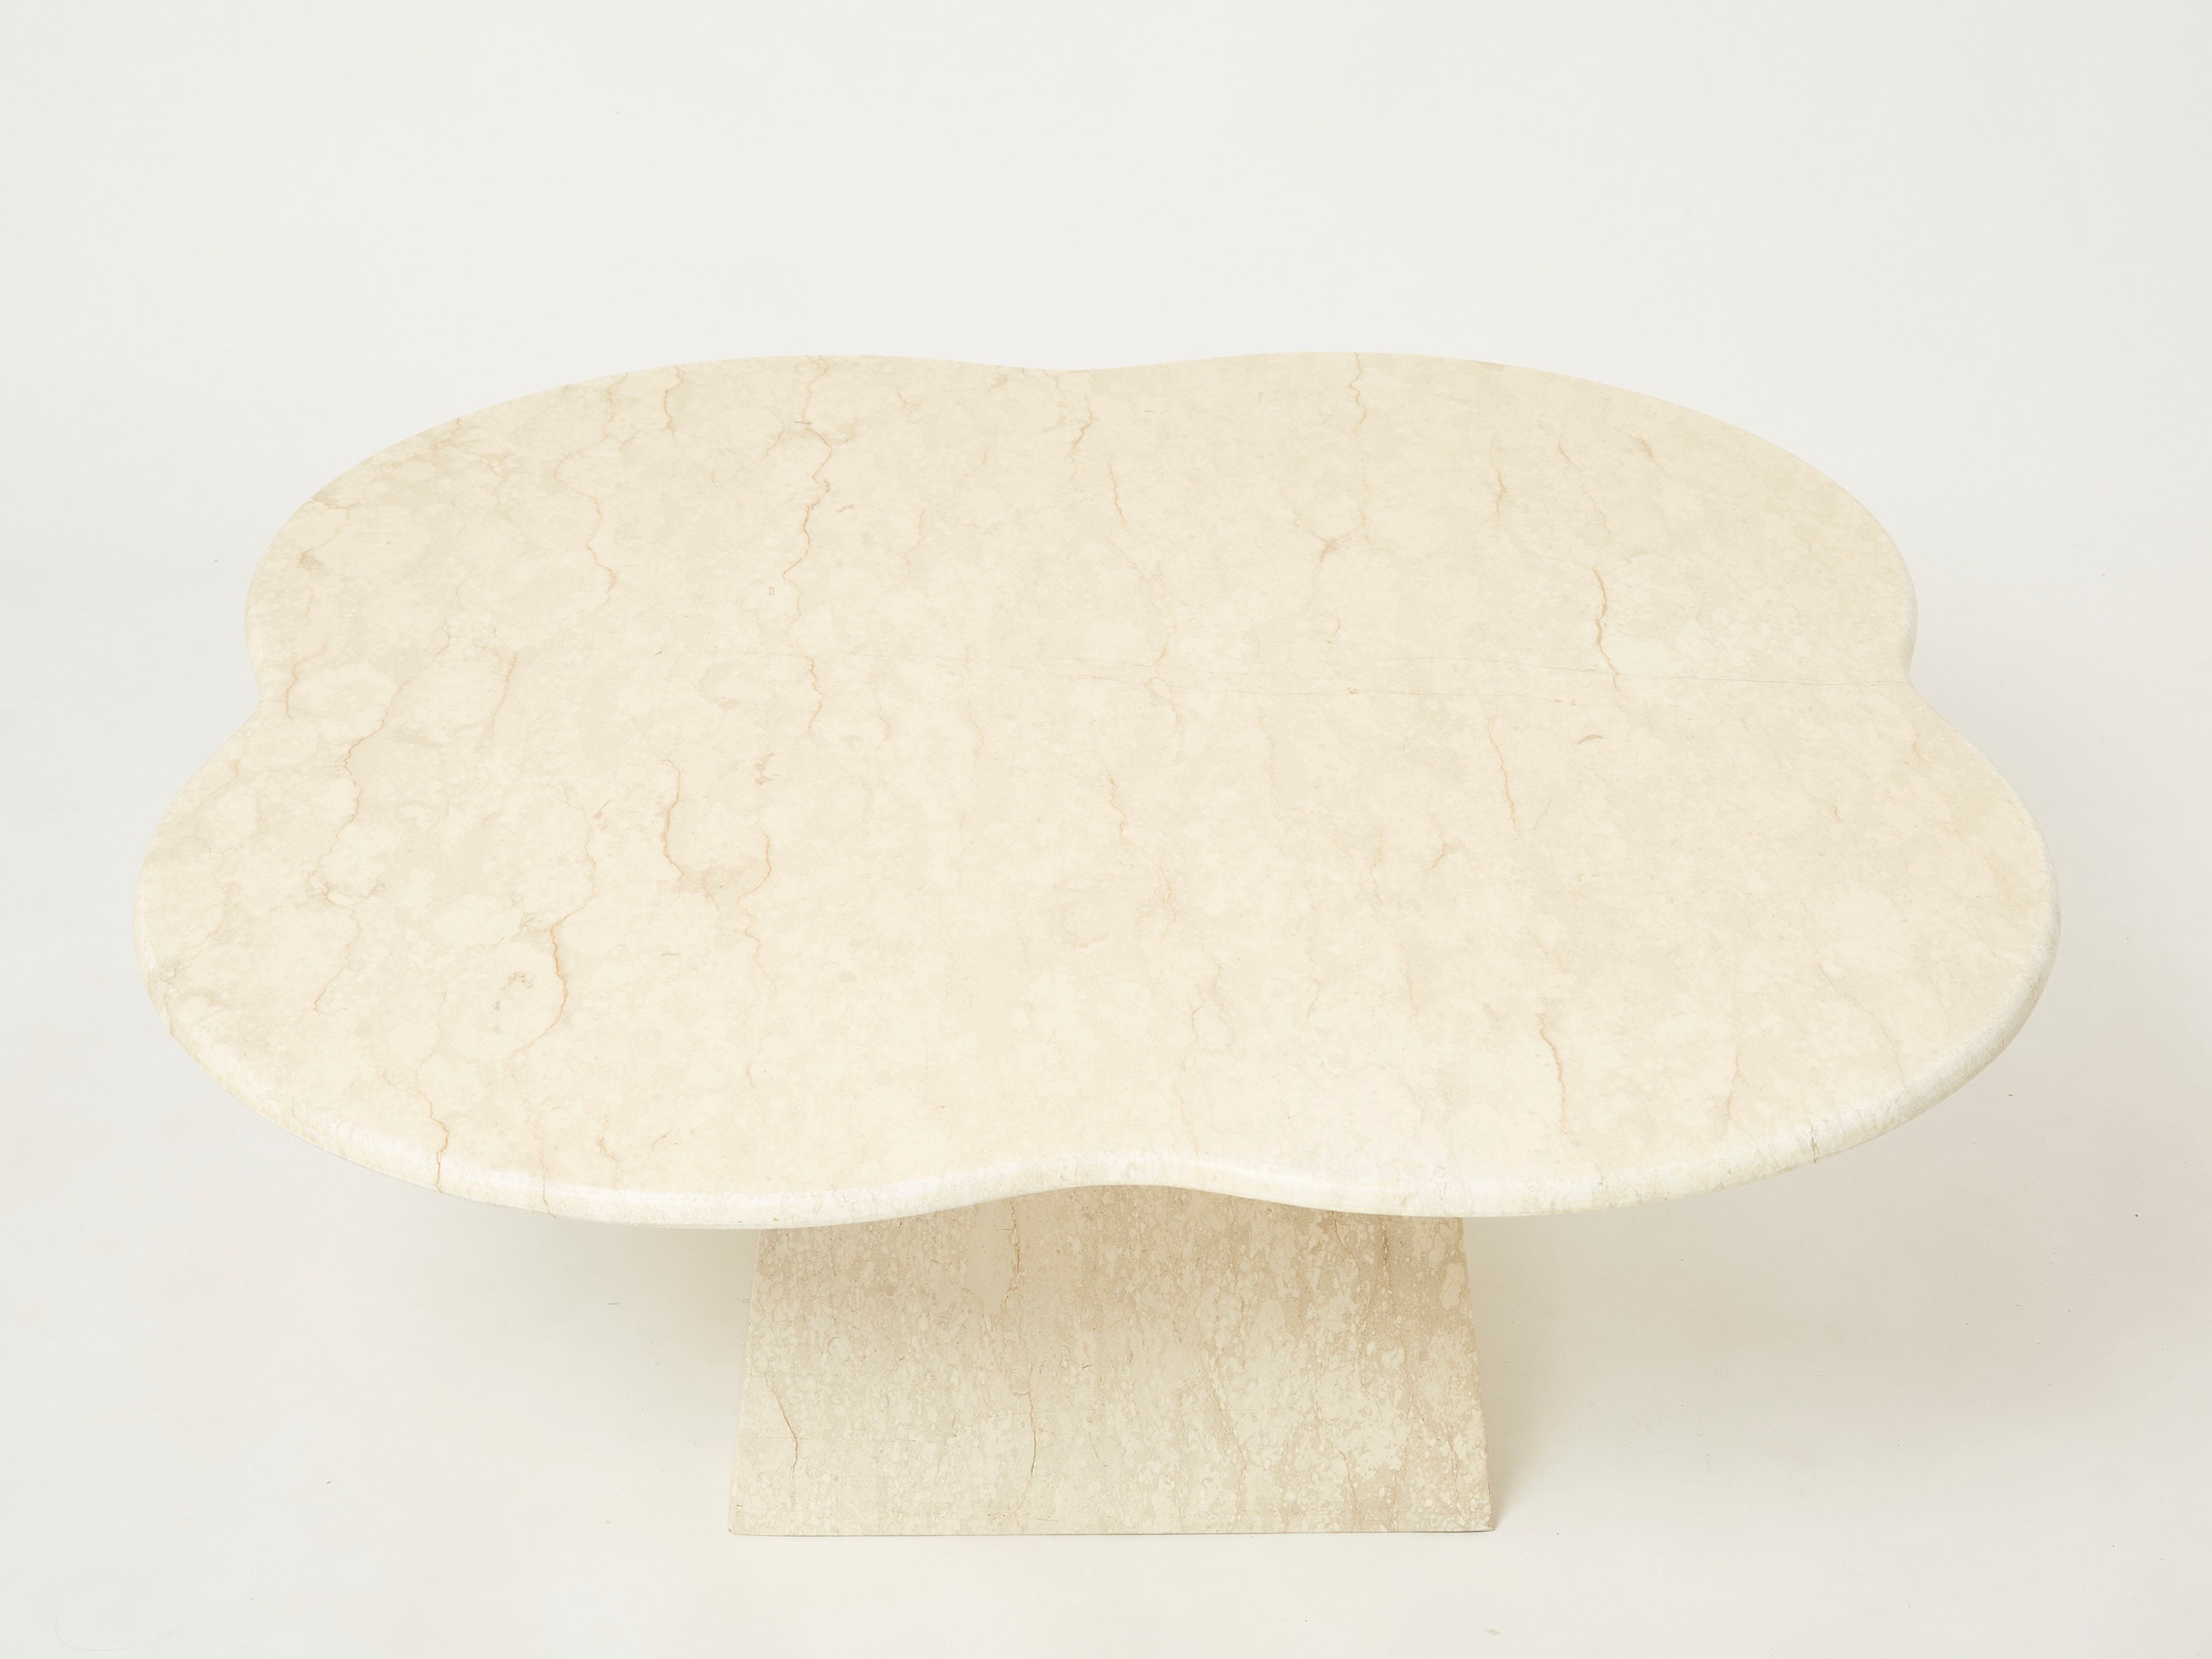 Large Clover Shaped Coffee Table Made Of Italian Travertine 1970S